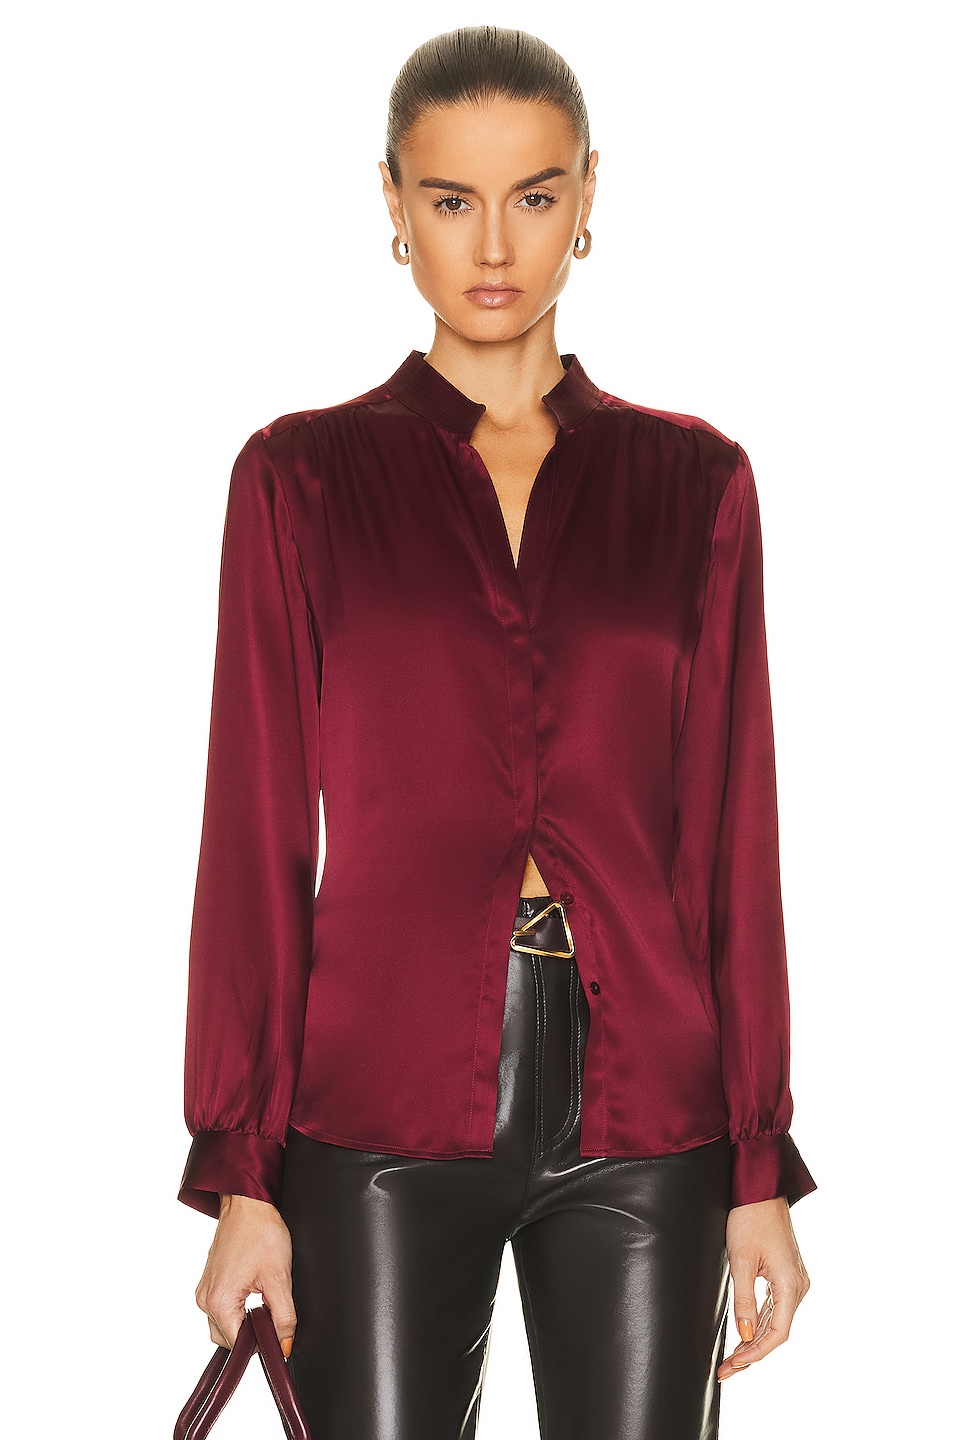 L'AGENCE Bianca Band Collar Blouse in Black Cherry | FWRD